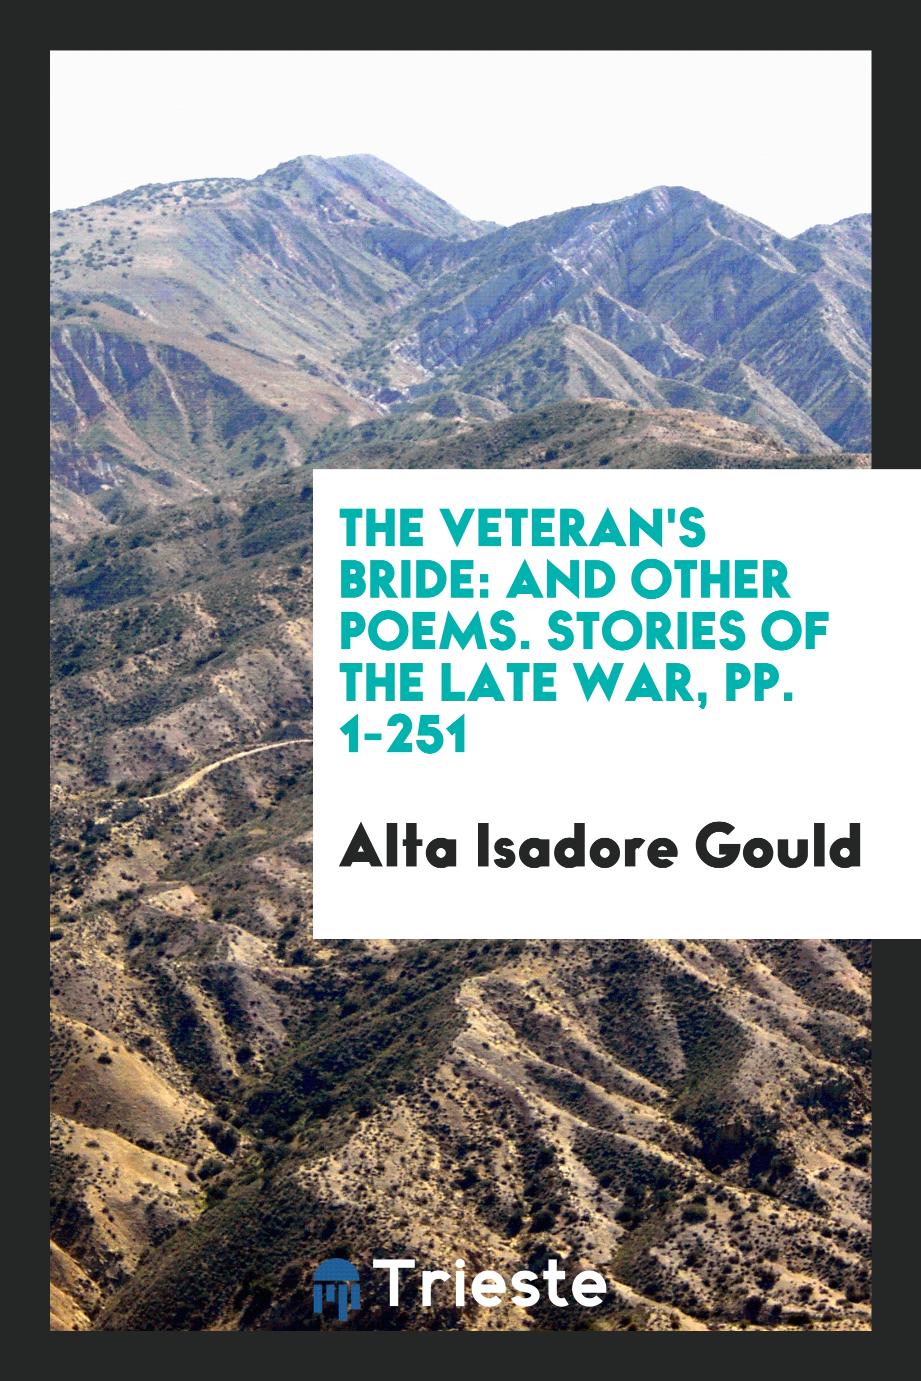 The Veteran's Bride: And Other Poems. Stories of the Late War, pp. 1-251